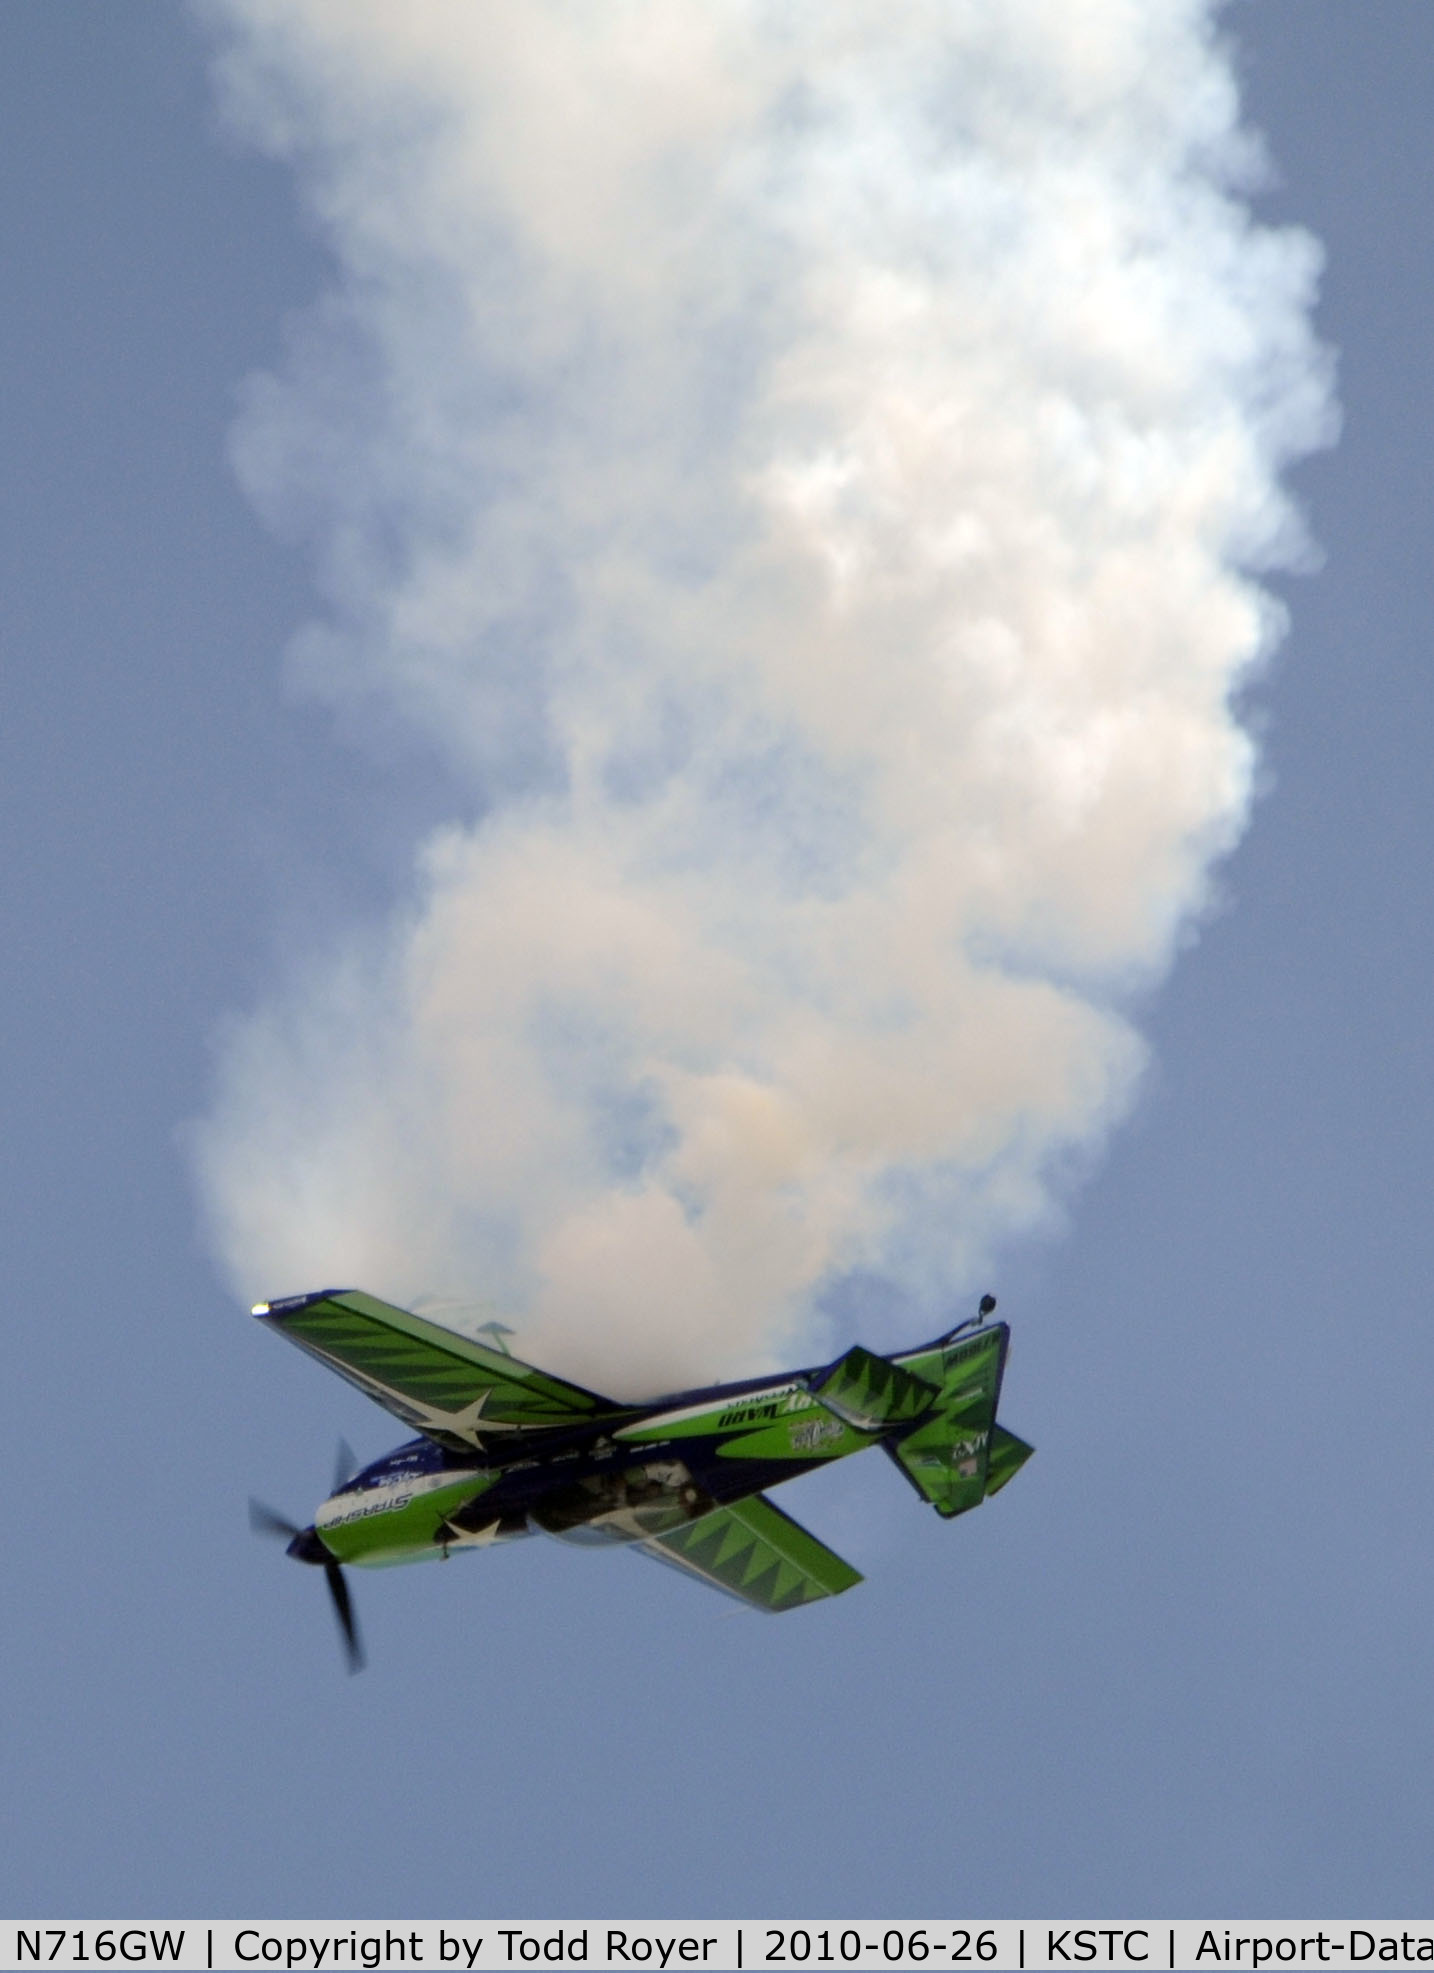 N716GW, 2006 MX Aircraft MX2 C/N 4, performing at the Great Minnesota Air Show